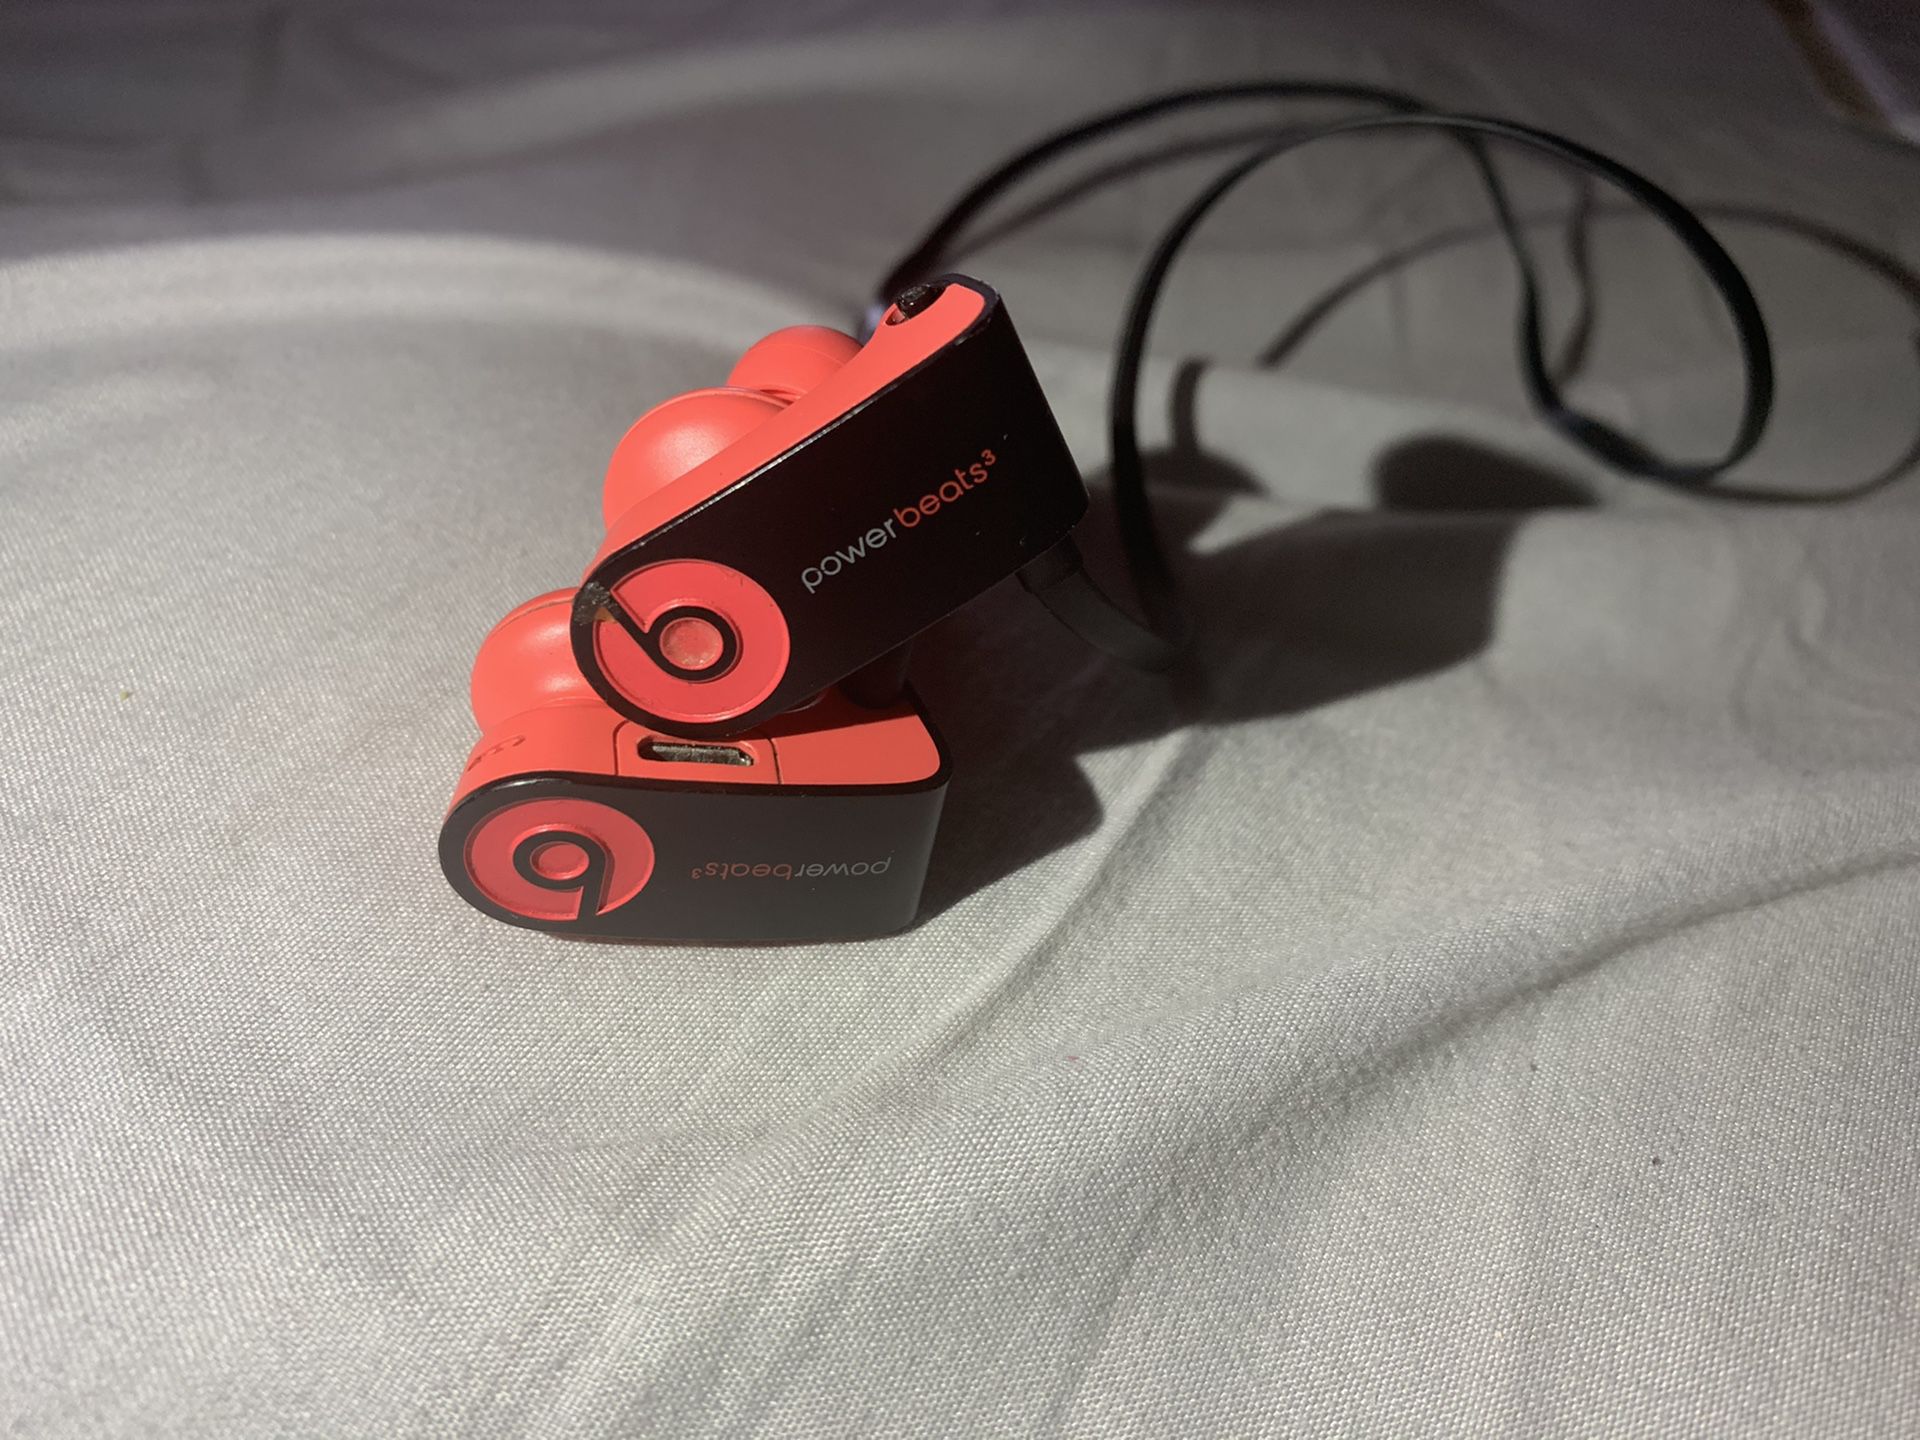 New Salmon Colored Beats by Dre Bluetooth Earphones With Case and 7 ft. Charger